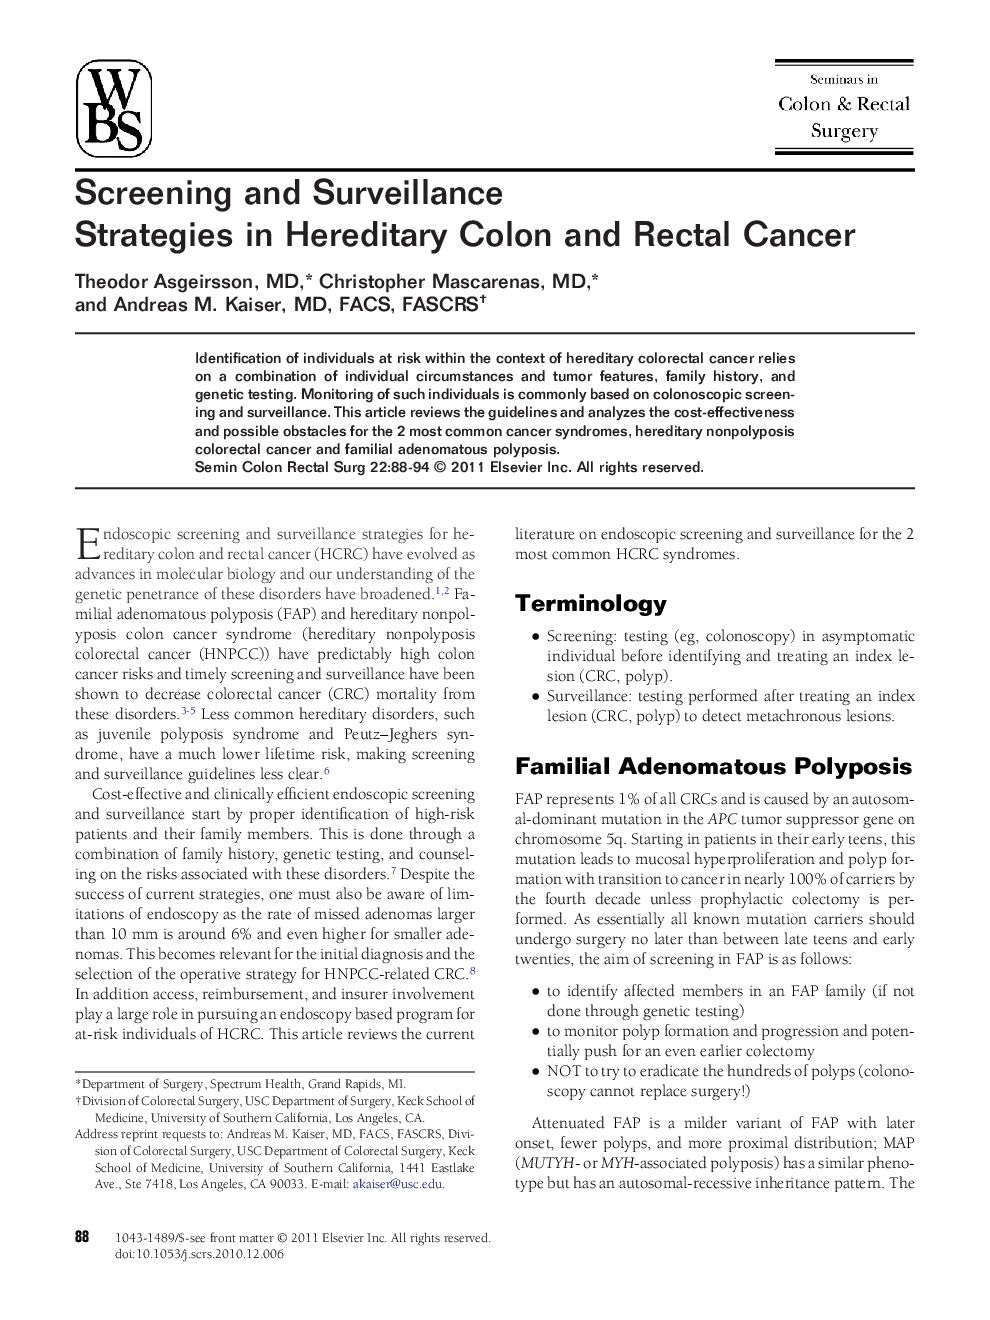 Screening and Surveillance Strategies in Hereditary Colon and Rectal Cancer